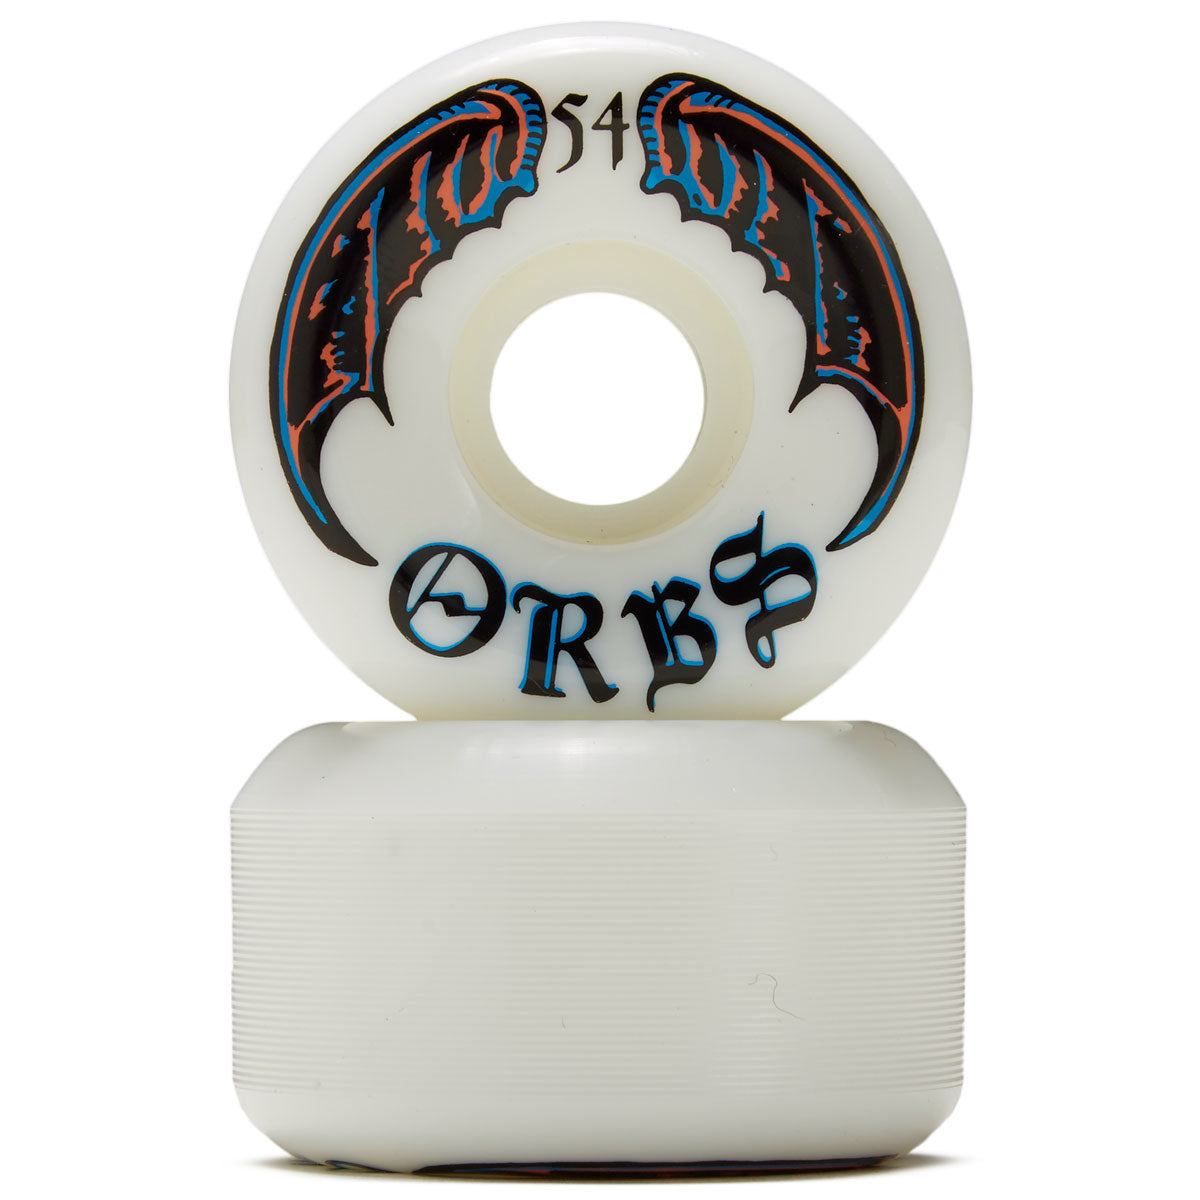 Welcome Orbs Specters Conical 99A Skateboard Wheels - White - 54mm image 2